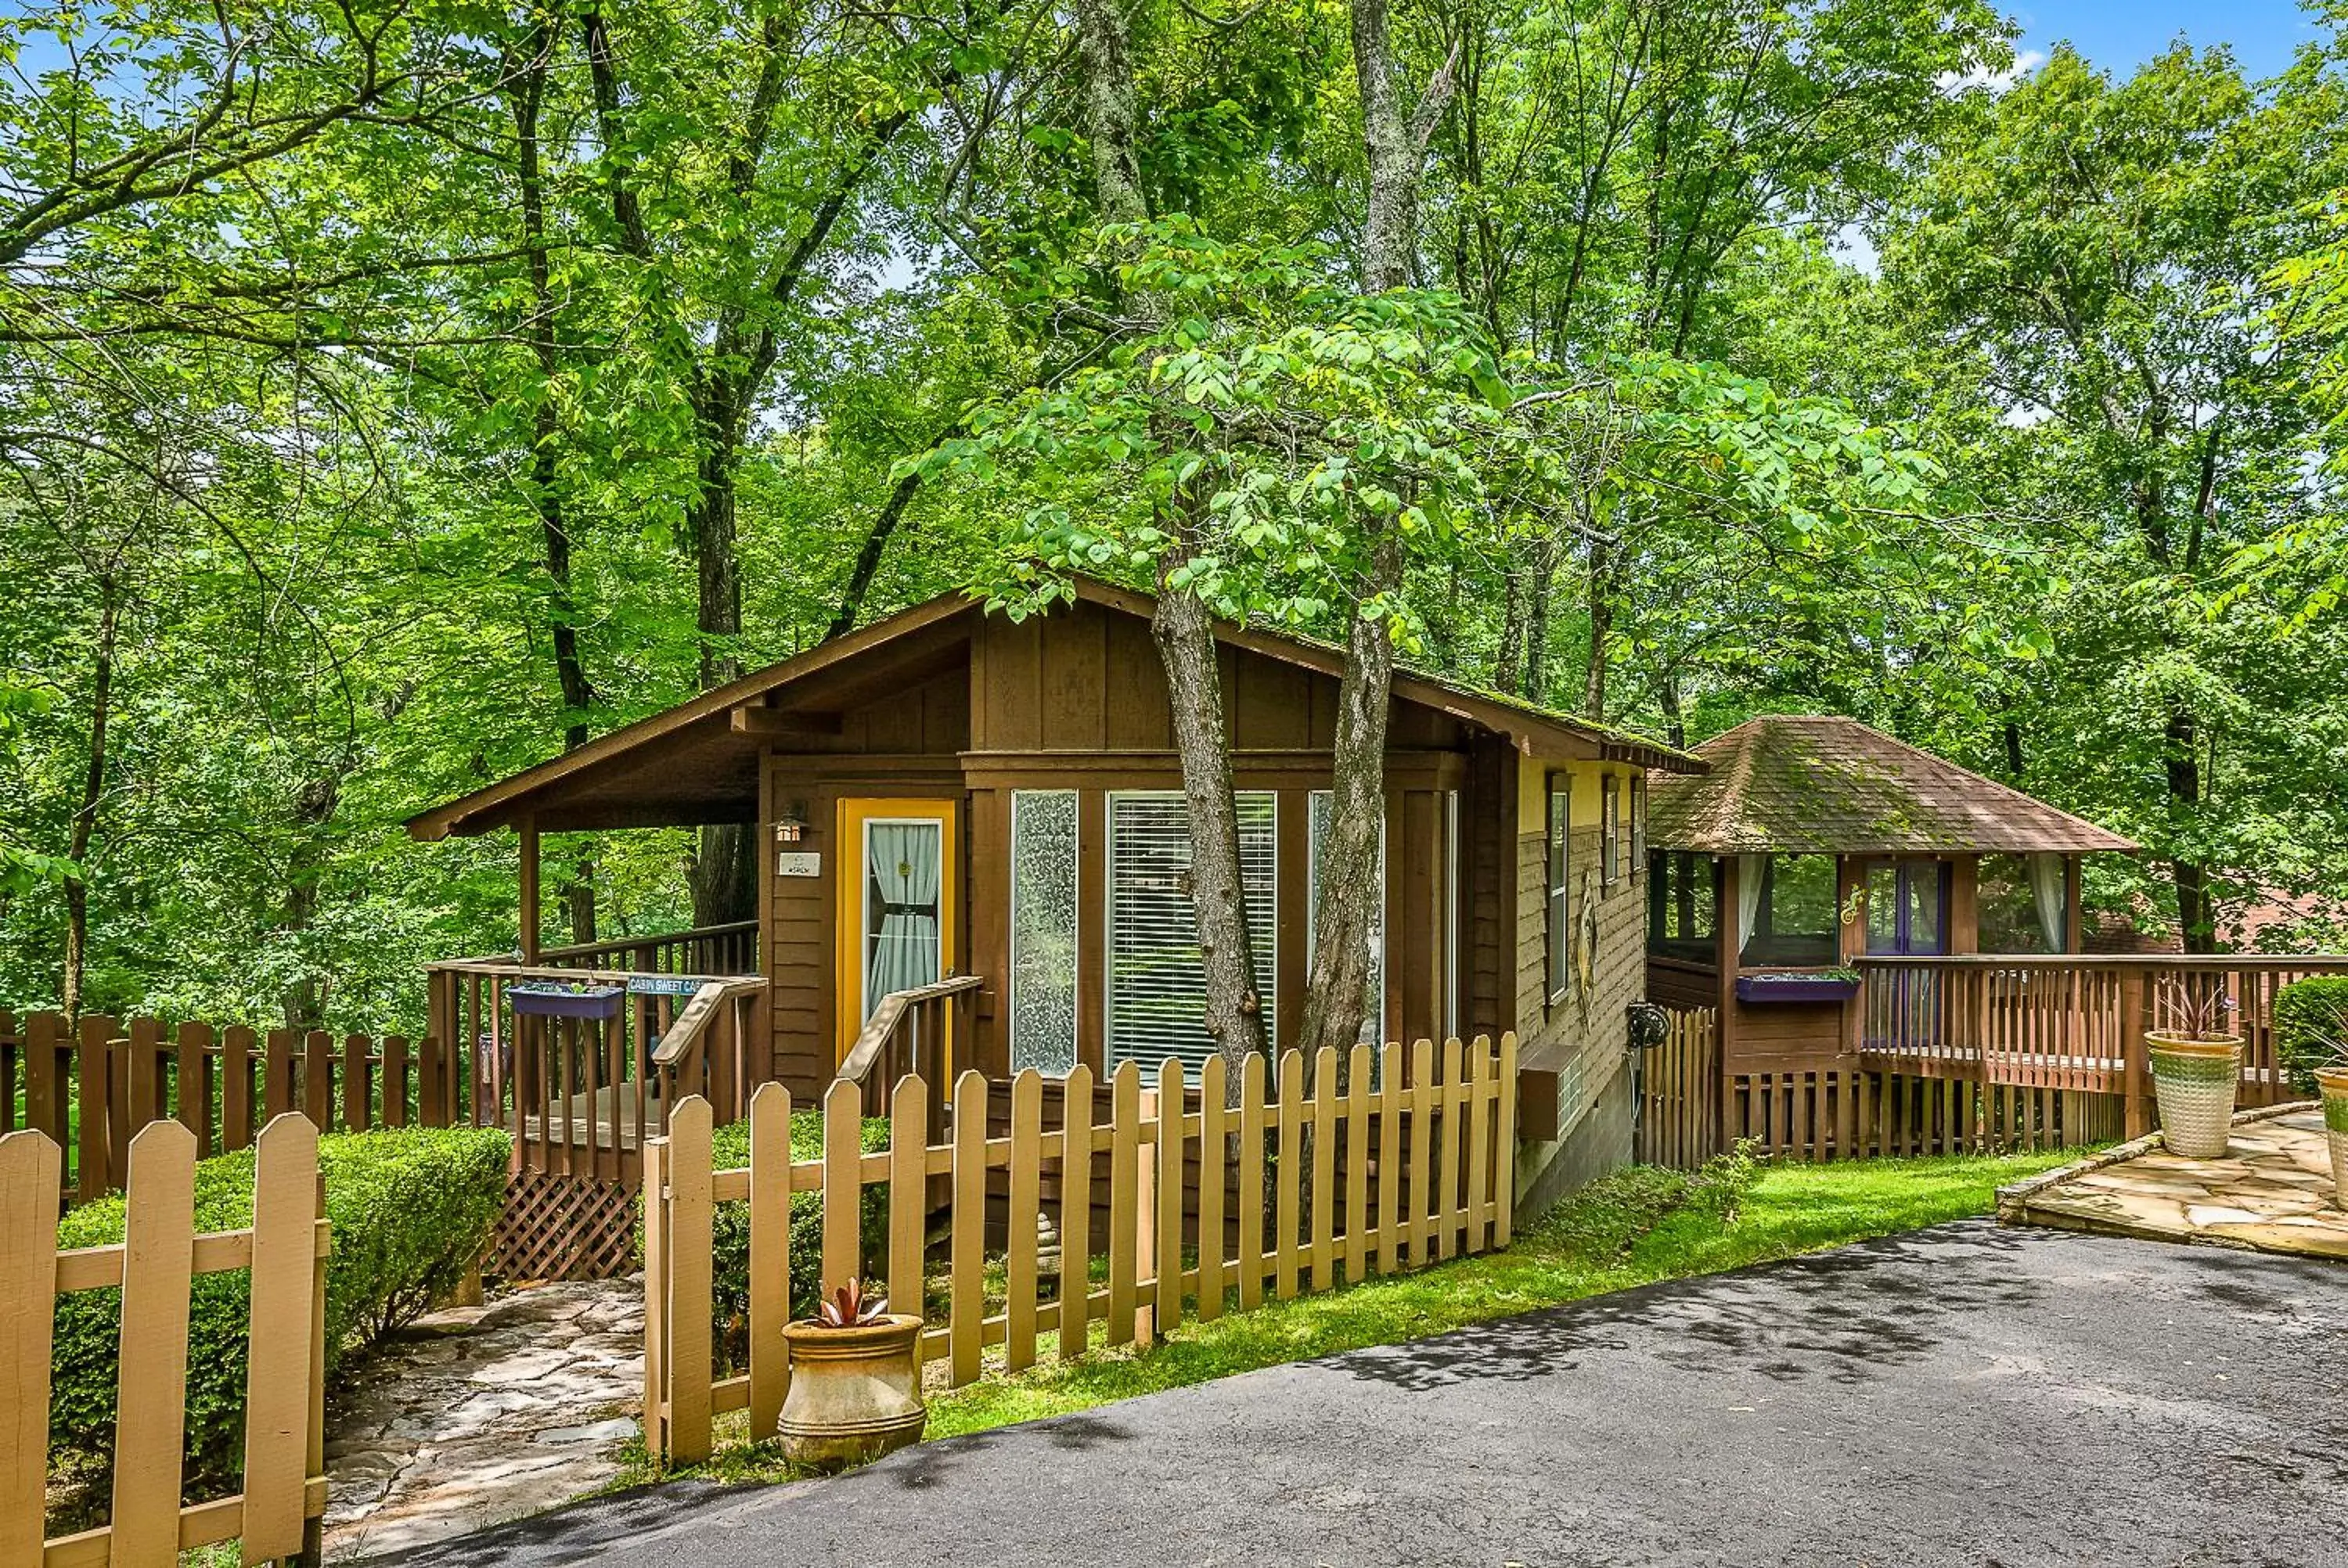 Property Building in The Woods Cabins